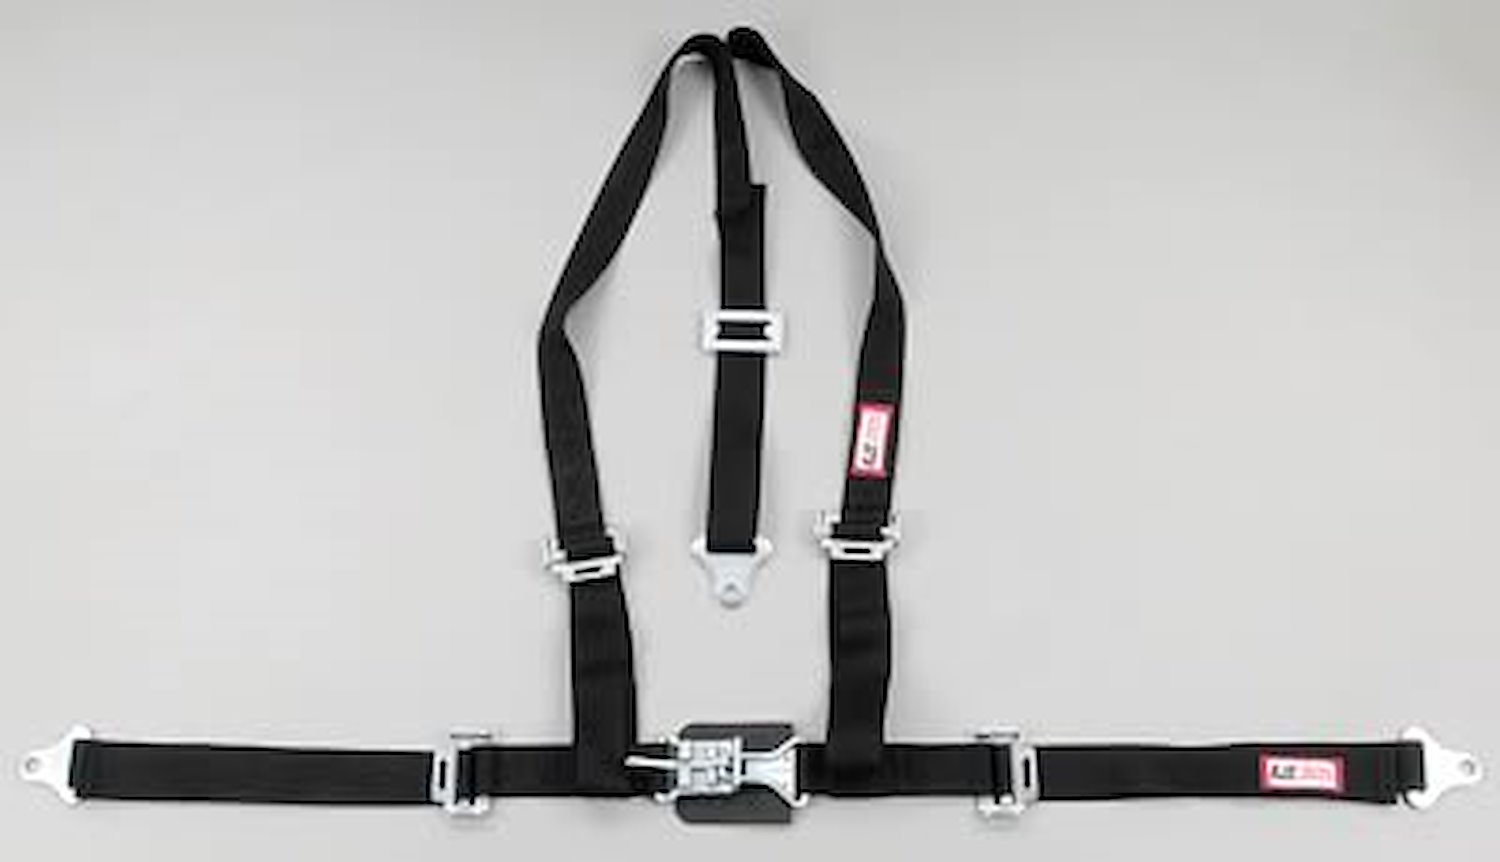 NON-SFI L&L HARNESS 2 PULL UP Lap Belt SEWN IN 2 S.H. V ROLL BAR Mount ALL WRAP ENDS PURPLE